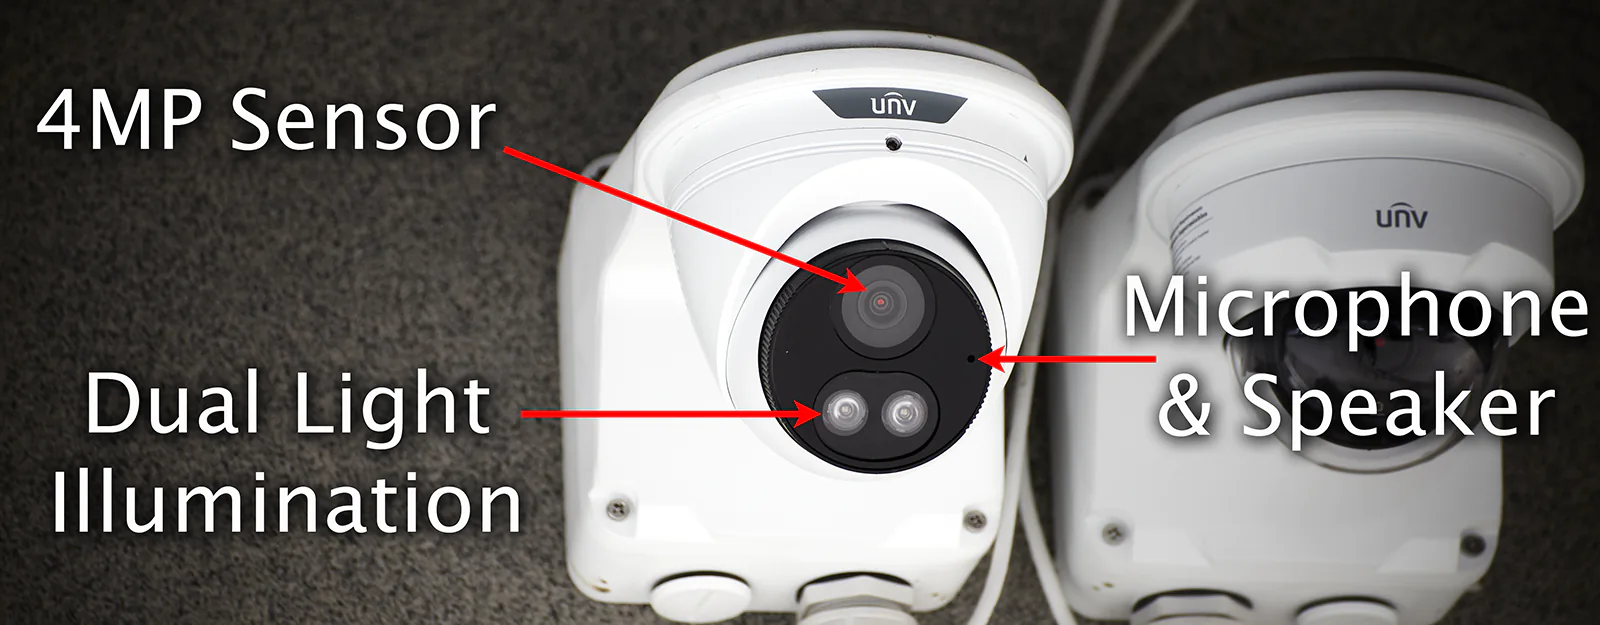 Banner image for Uniview IPC3614SR3-ADF28KMC-DL security camera